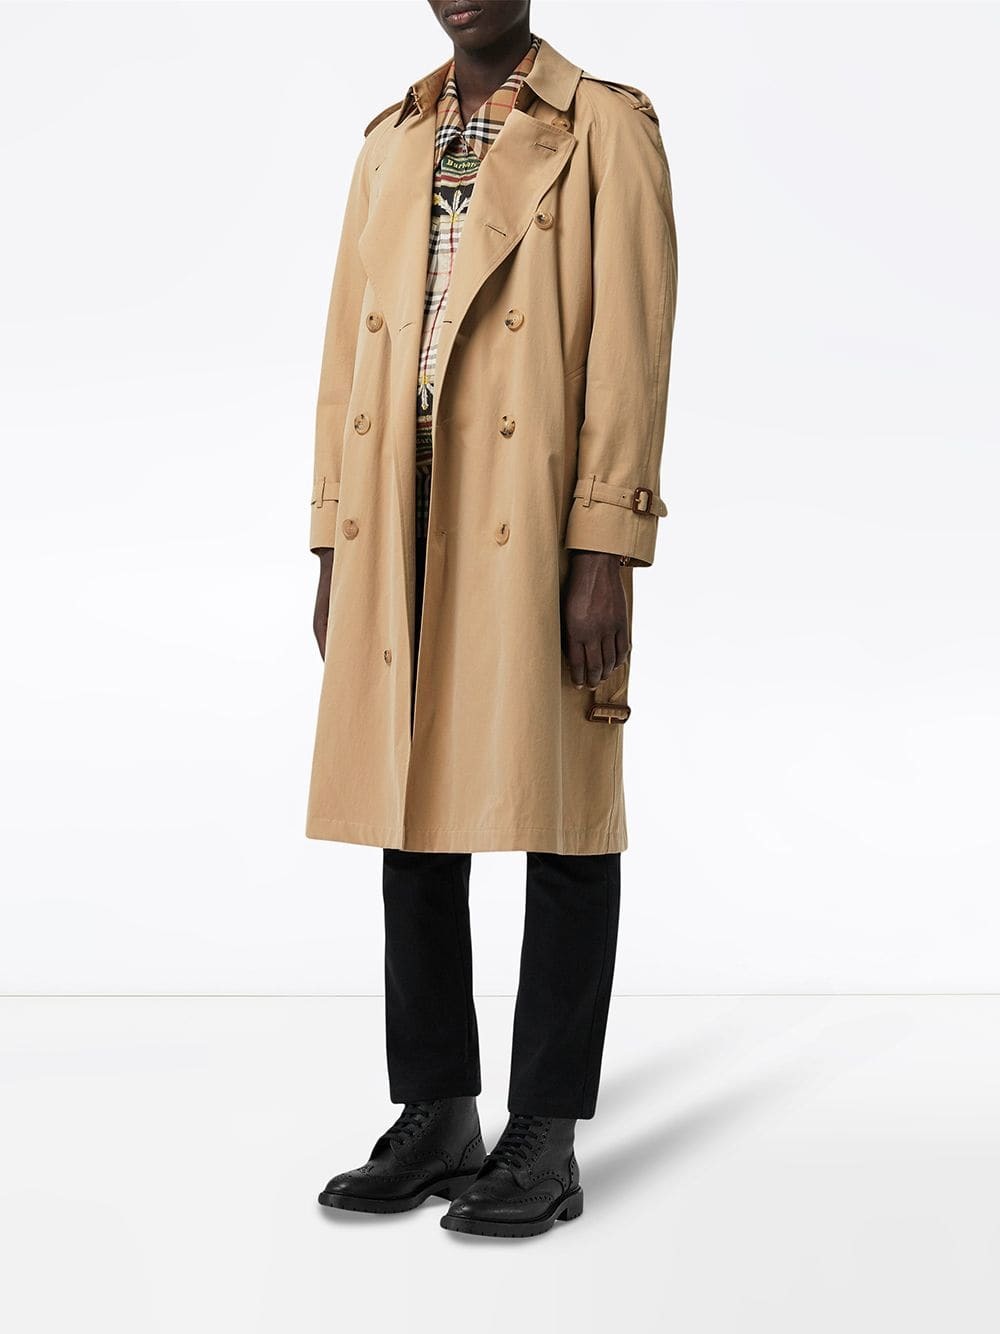 Burberry Westminster Heritage Trench Coat, $2,350 | farfetch.com ...